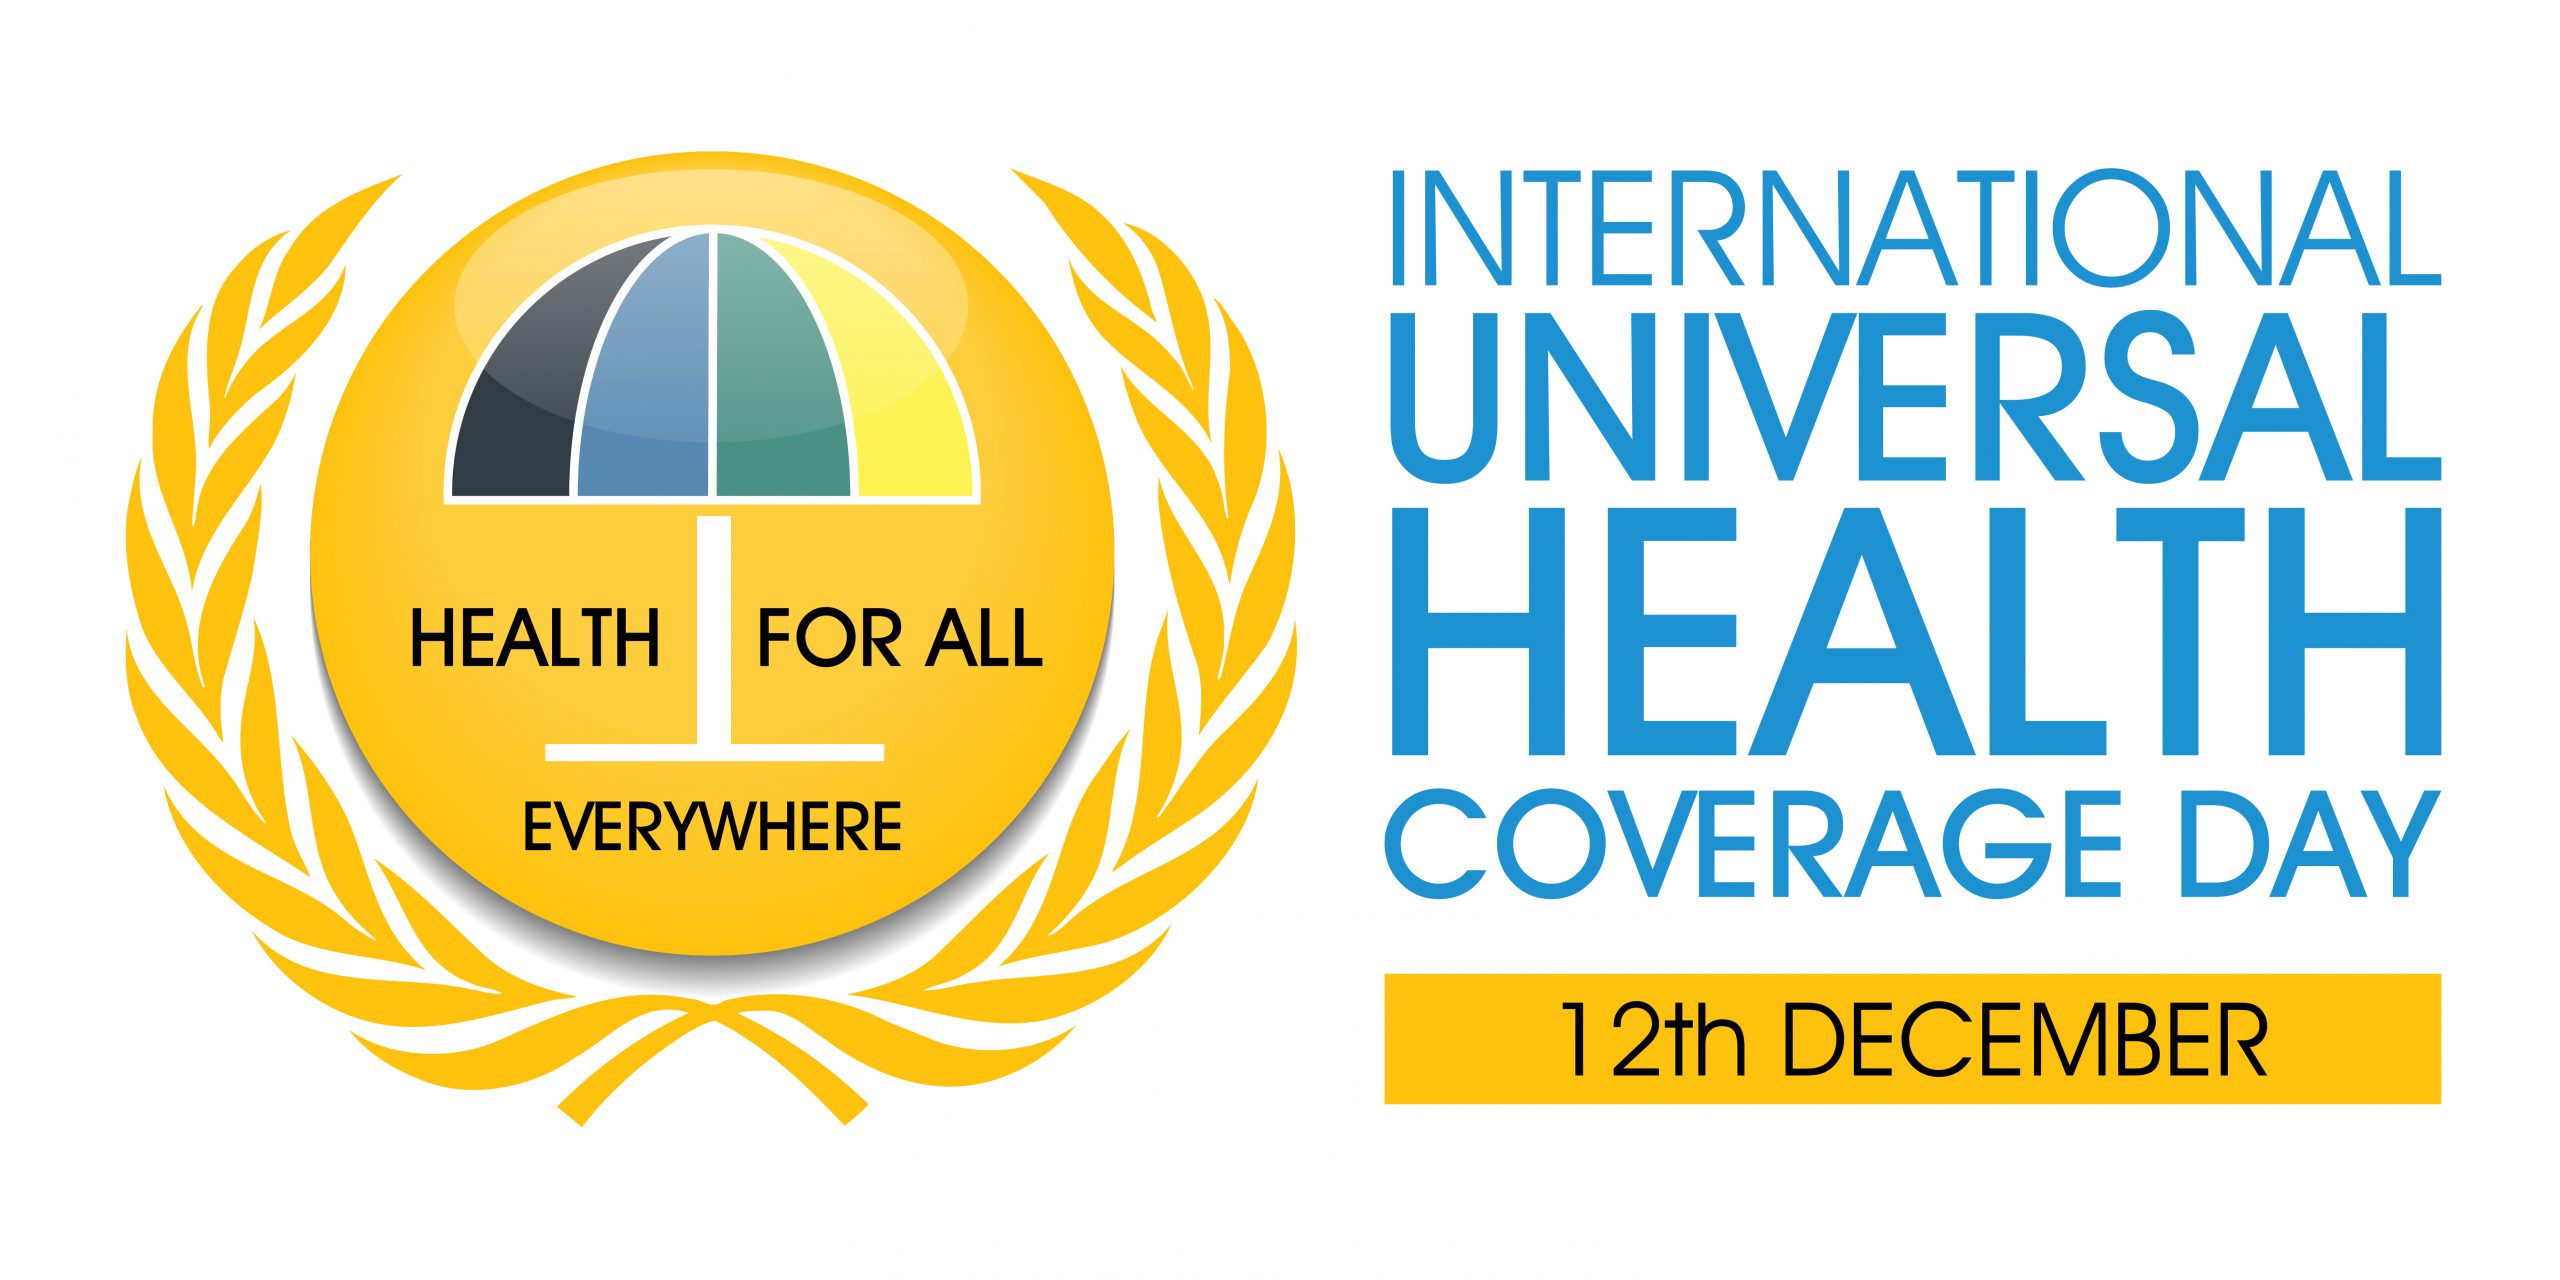 Health as a right and a reality for everyone with Universal Health